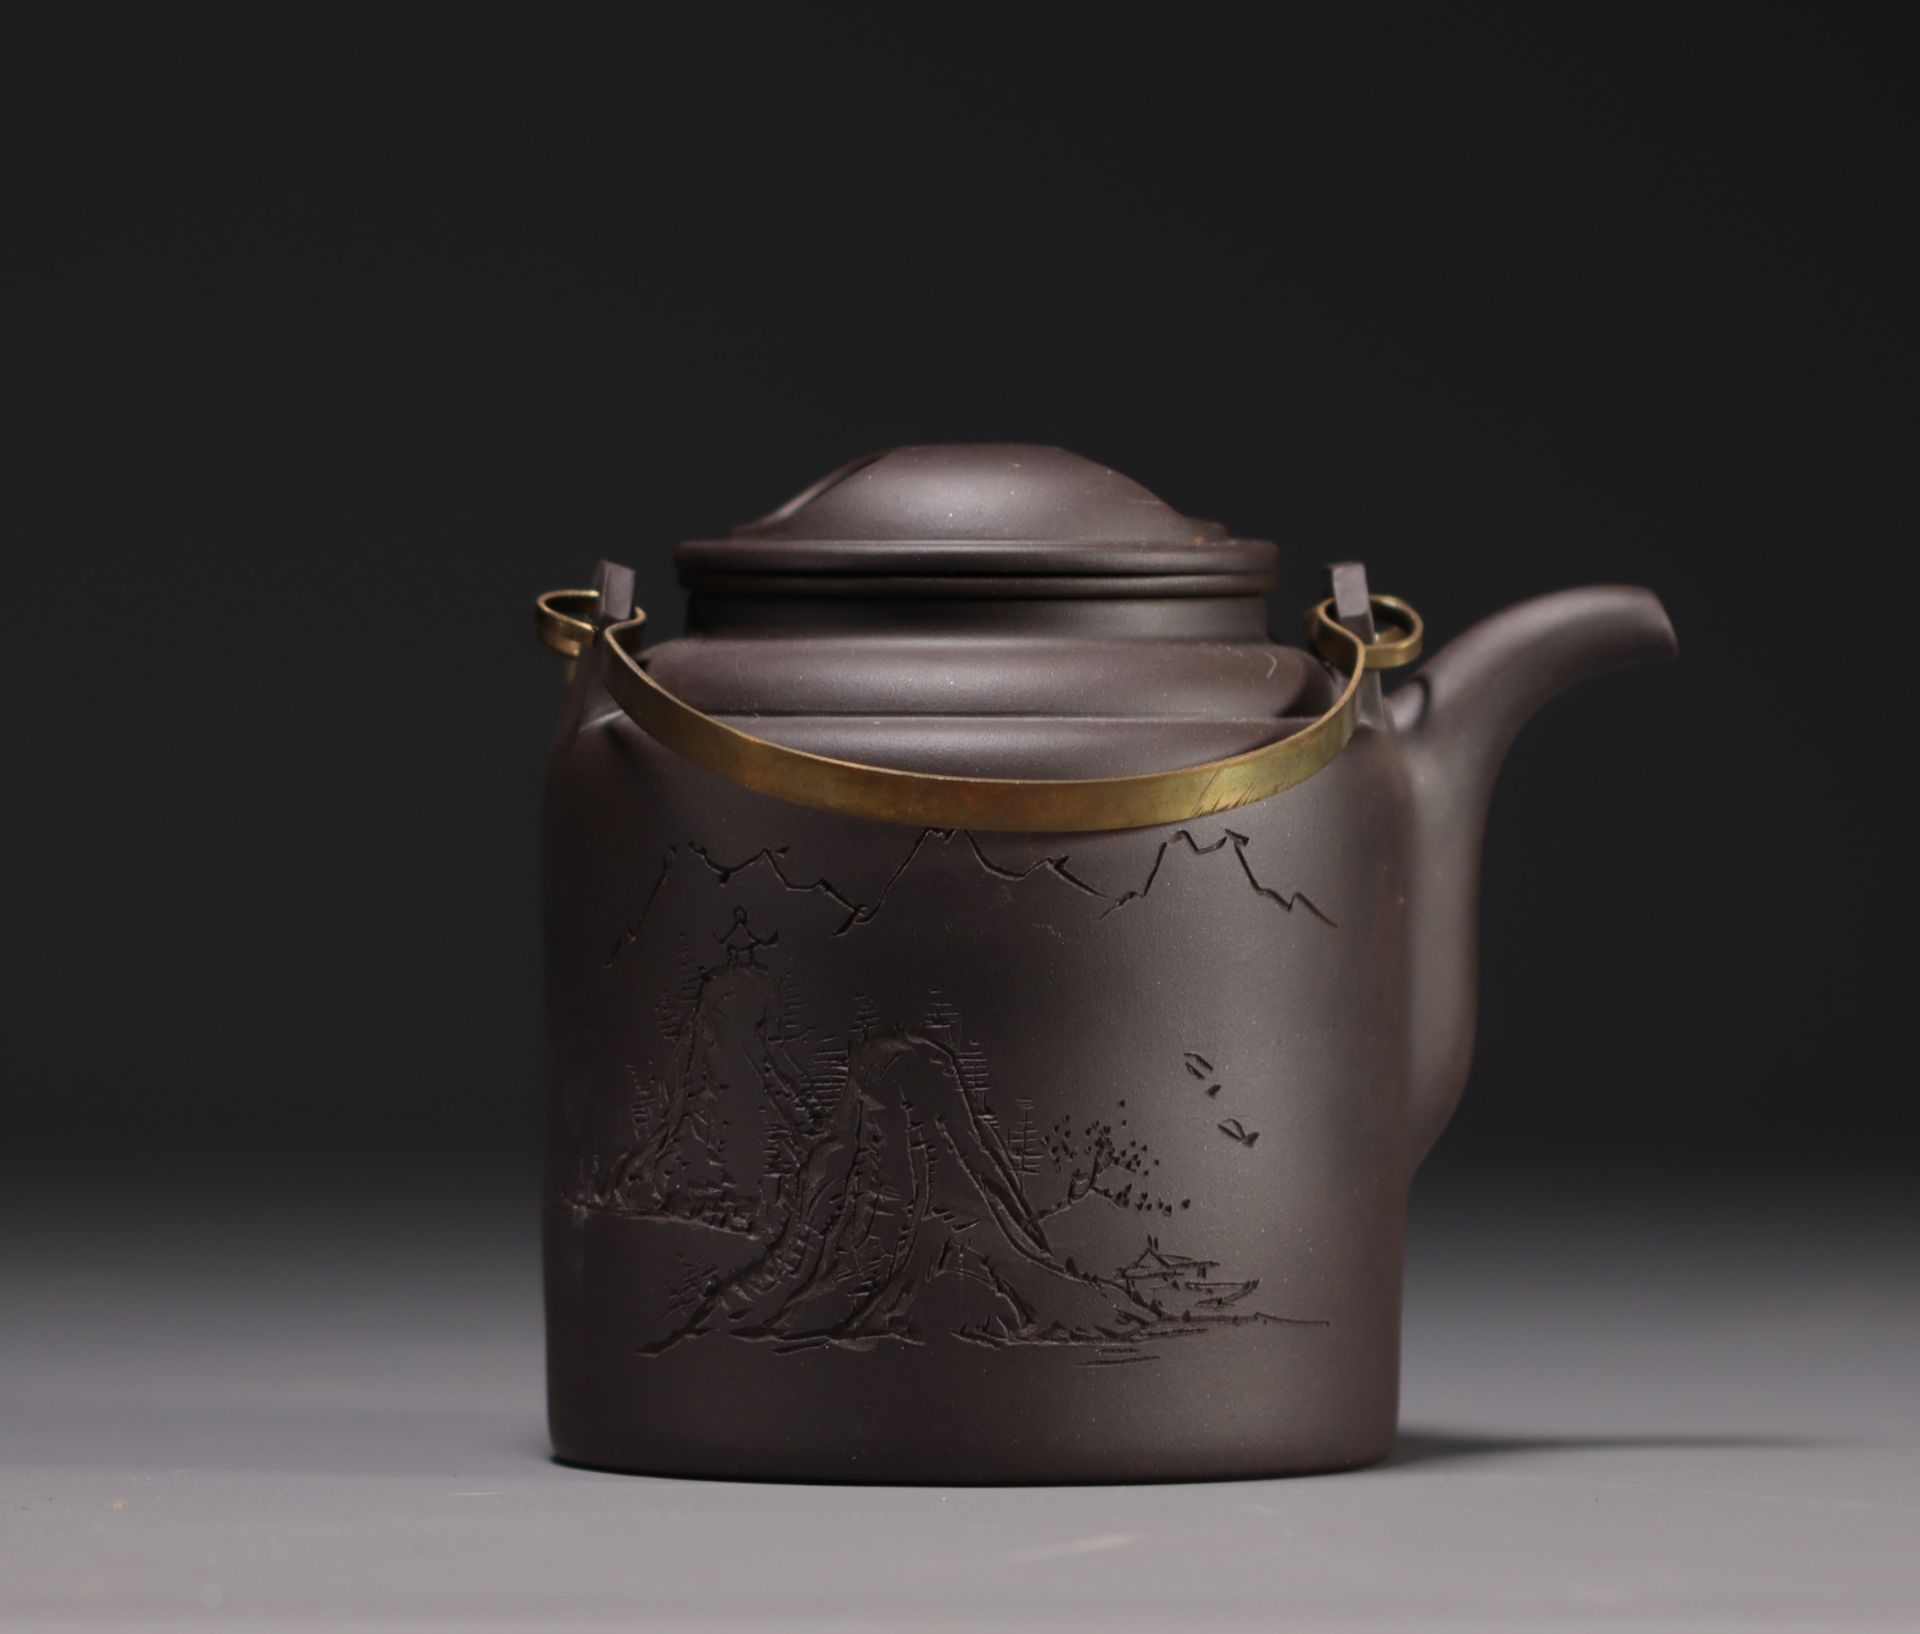 China - Yixing violet clay teapot in its box, 20th century. - Bild 3 aus 5